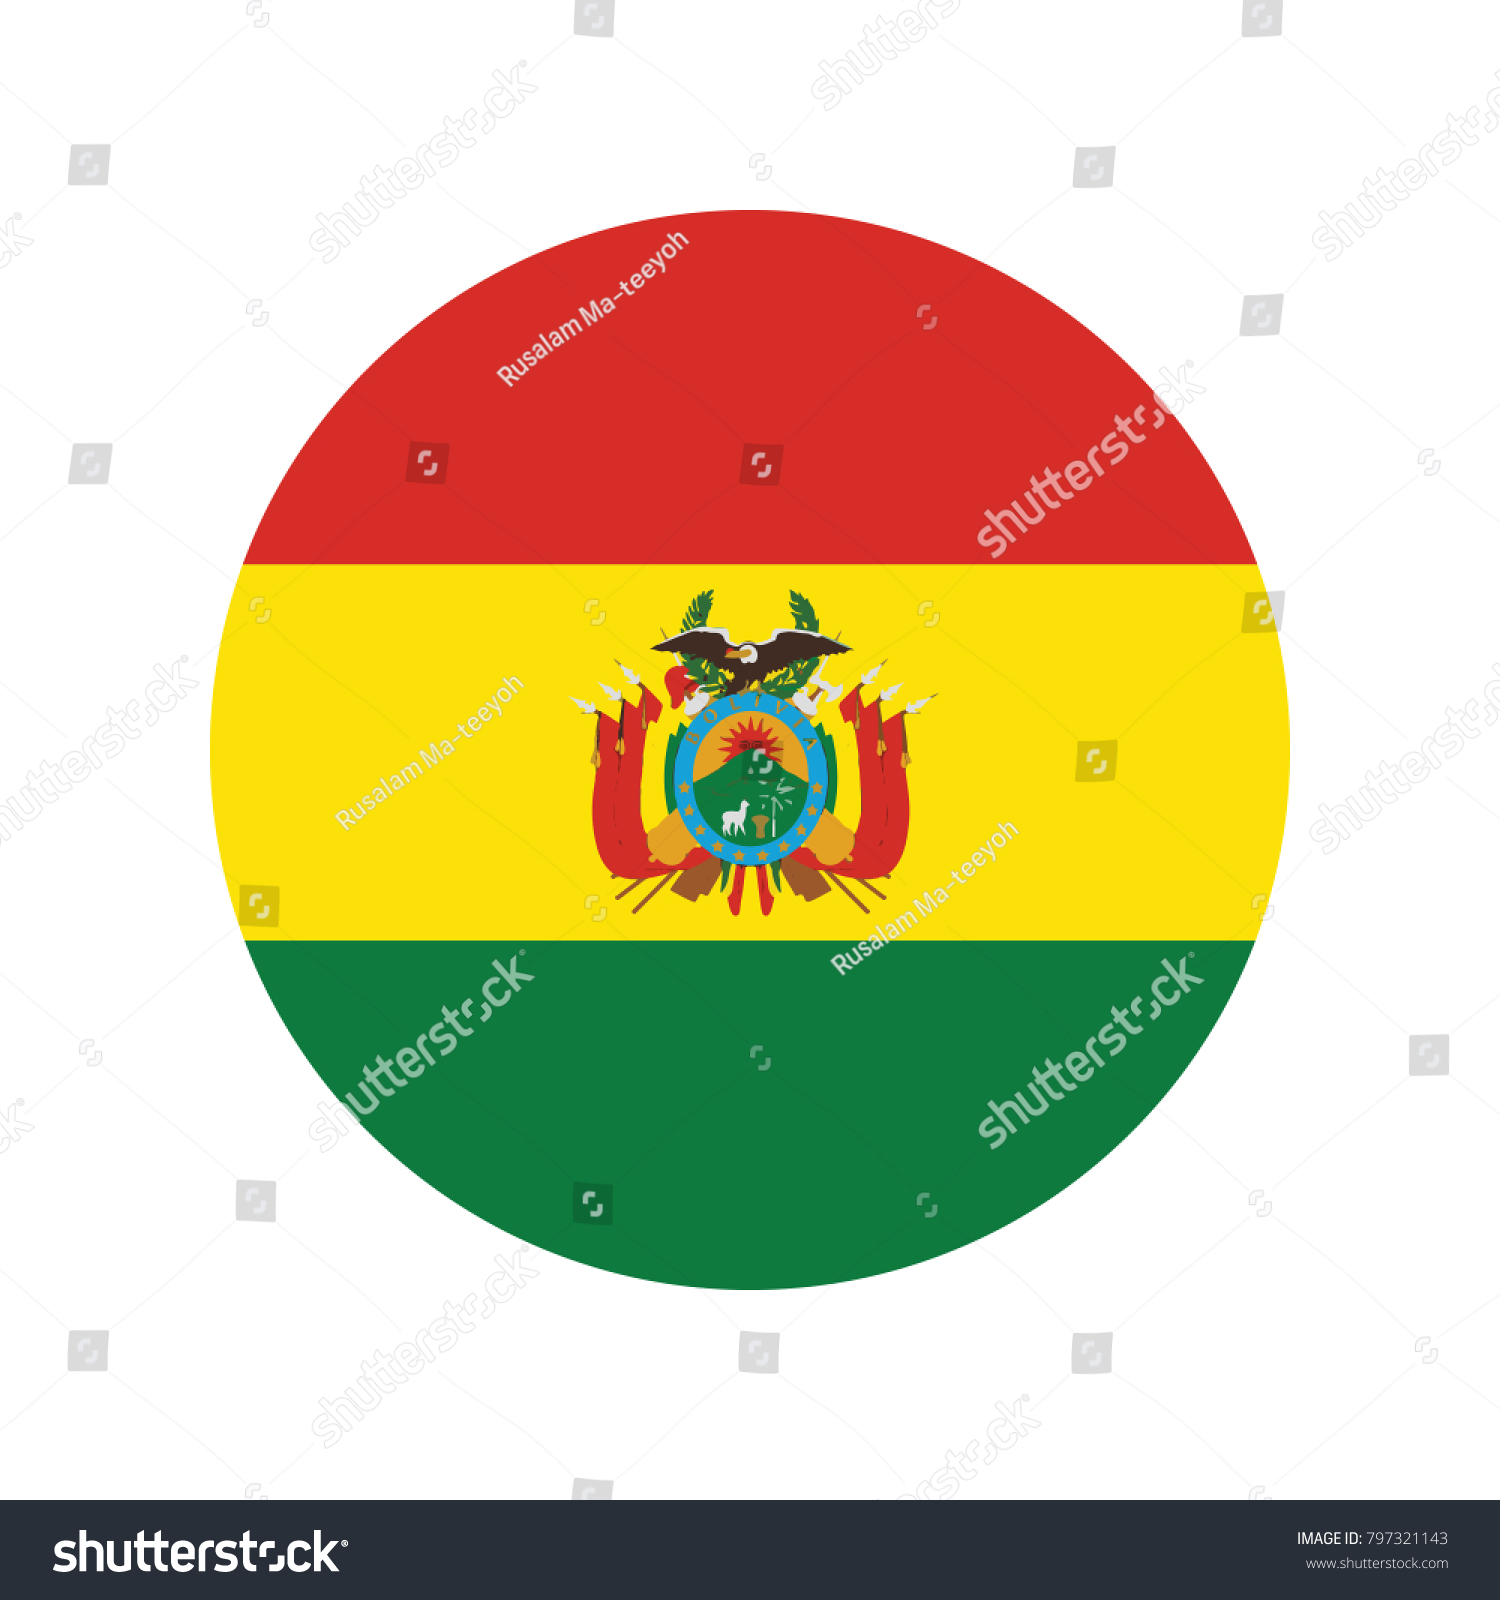 1,084 Bolivia flag round Images, Stock Photos & Vectors | Shutterstock